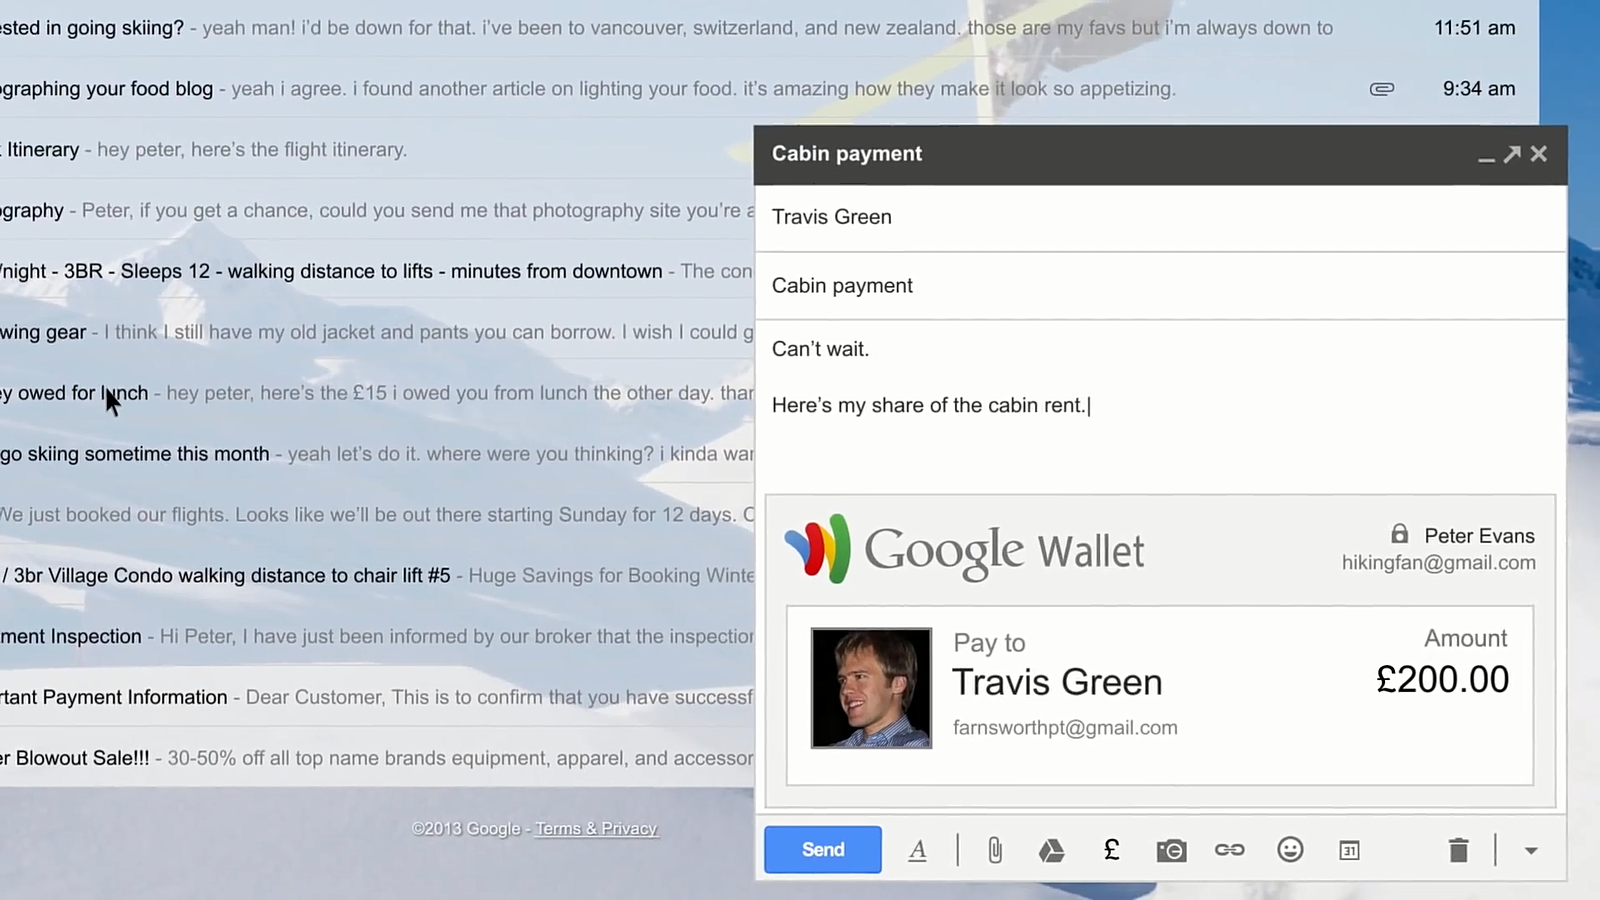 Gmail Mobile Payment Service Arrives in the UK